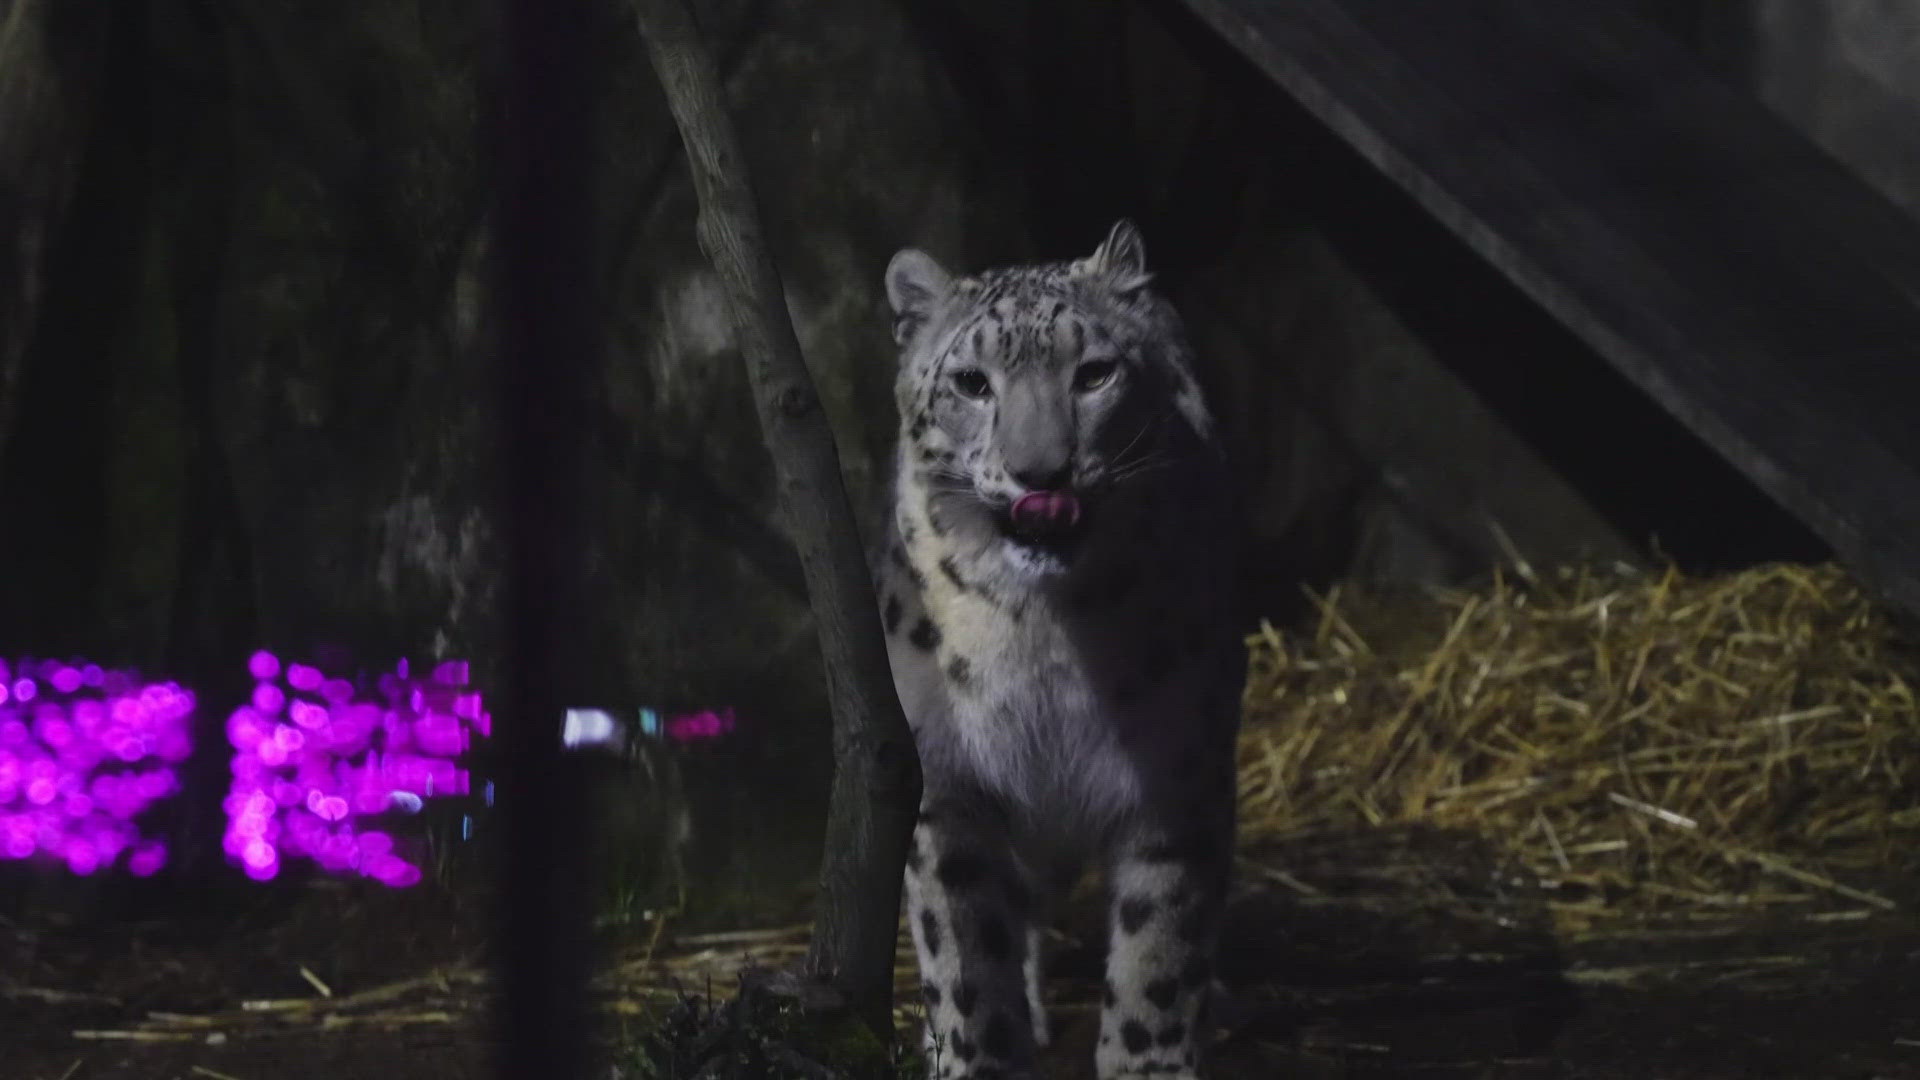 3News' Kierra Cotton speaks with Akron Zoo Marketing & PR Manager Elena Bell about the zoo's Wildlife Illuminated event series, running through June 1.